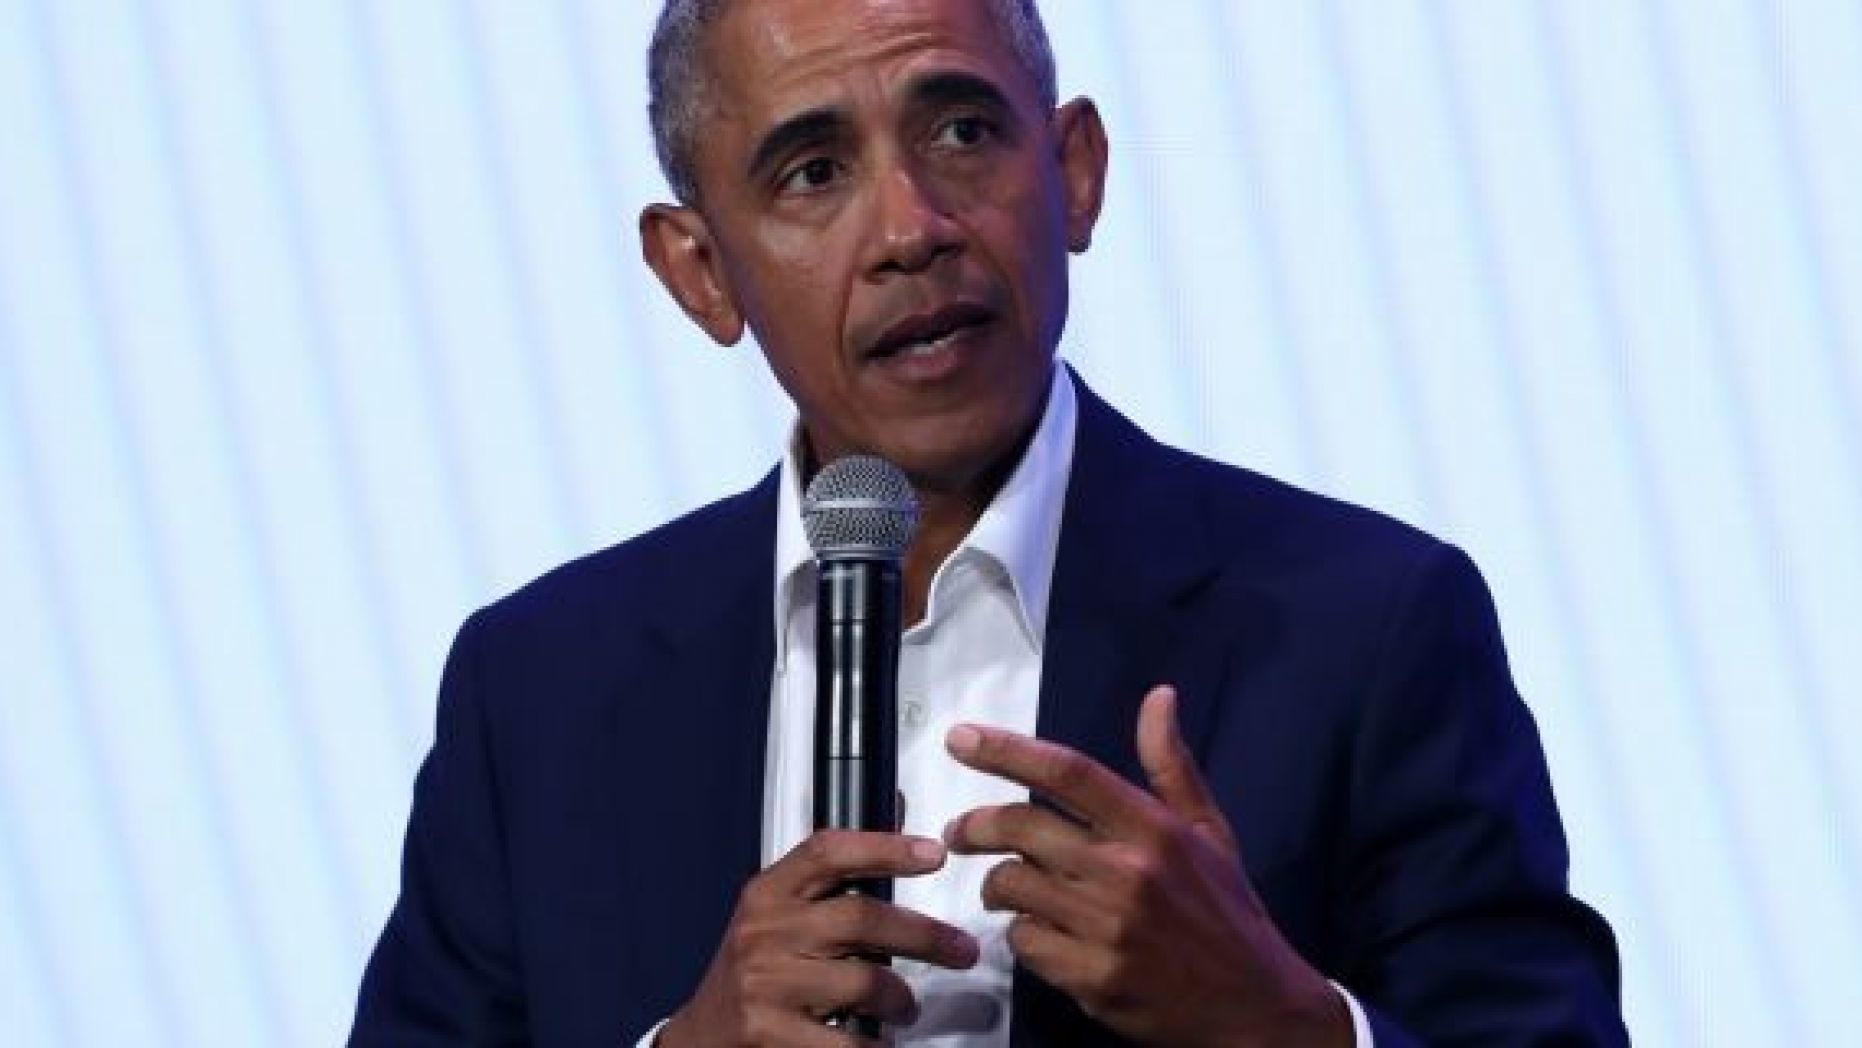 Former President Barack Obama speaks during the MBK Rising! My Brother’s Keeper Alliance Summit on February 19, 2019 in Oakland, California.